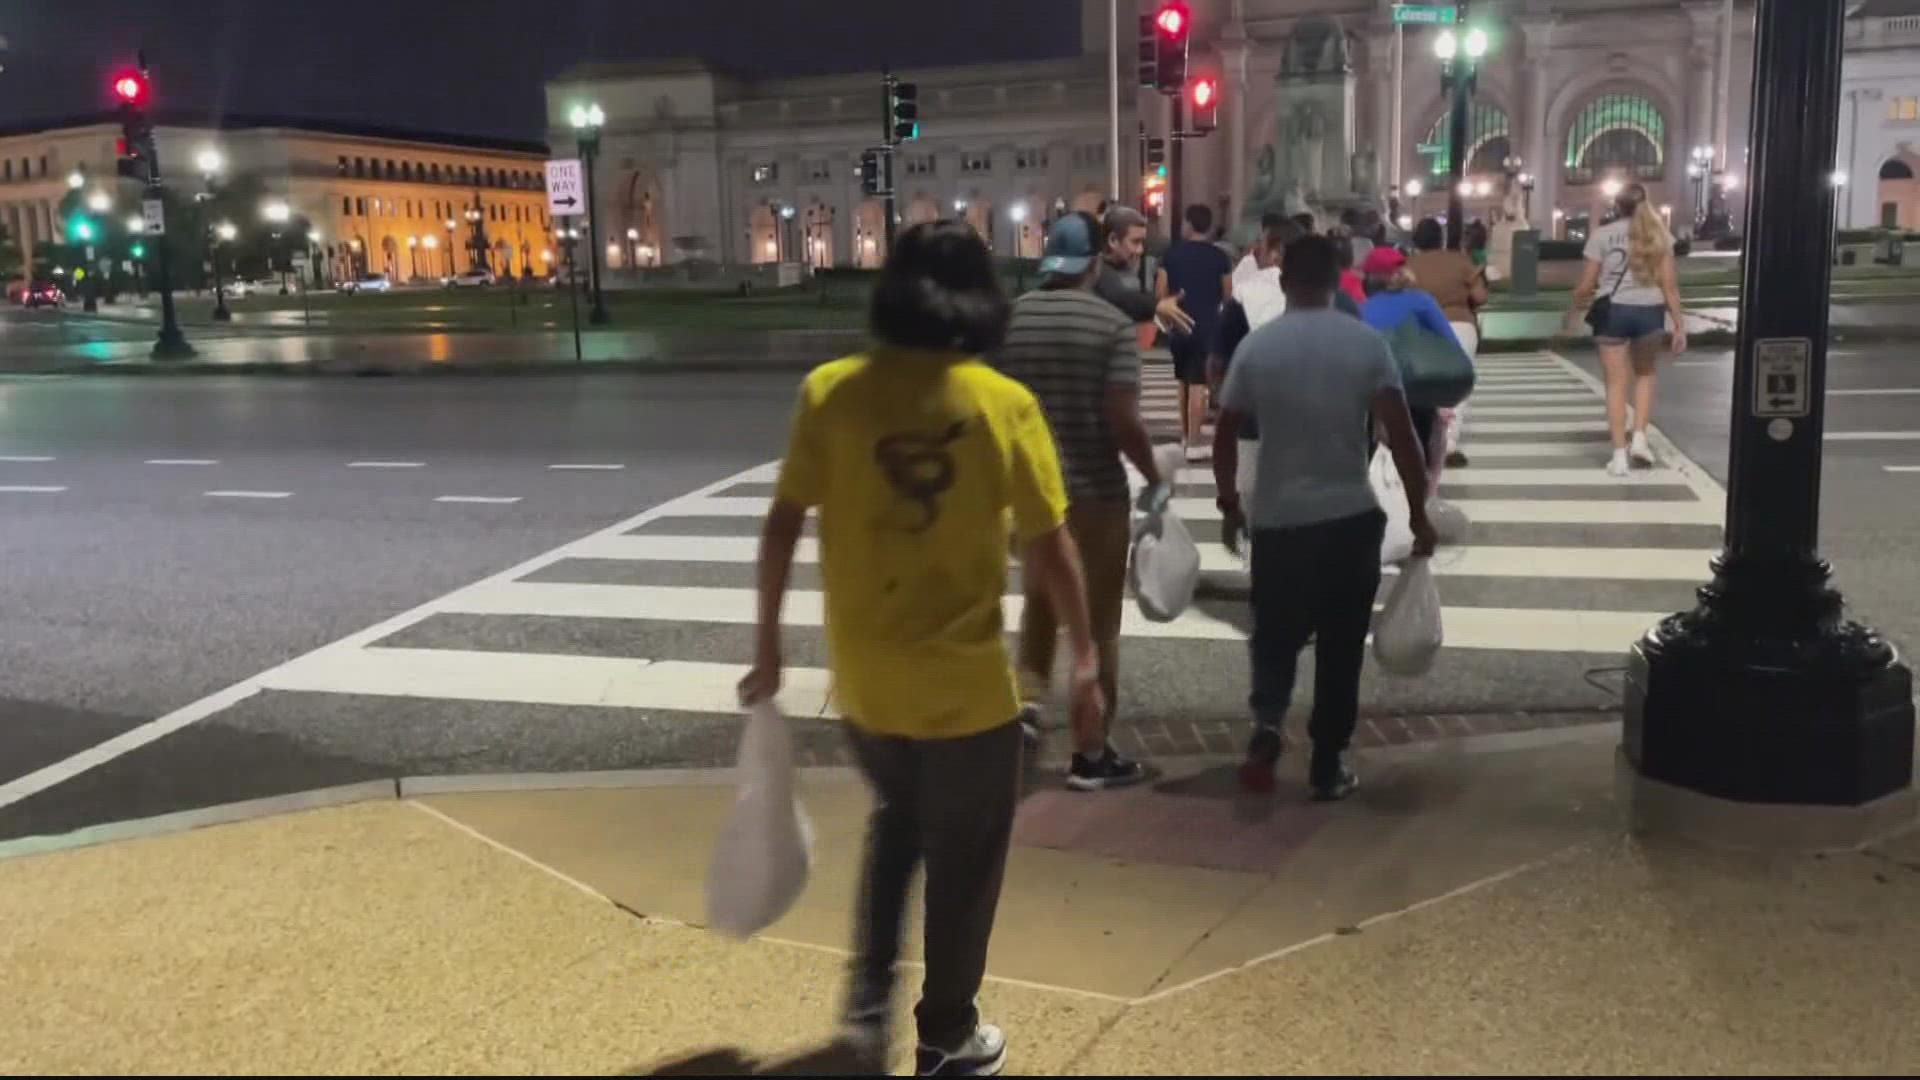 One group of men was dropped off at Union Station this week. Now they're sleeping outside.